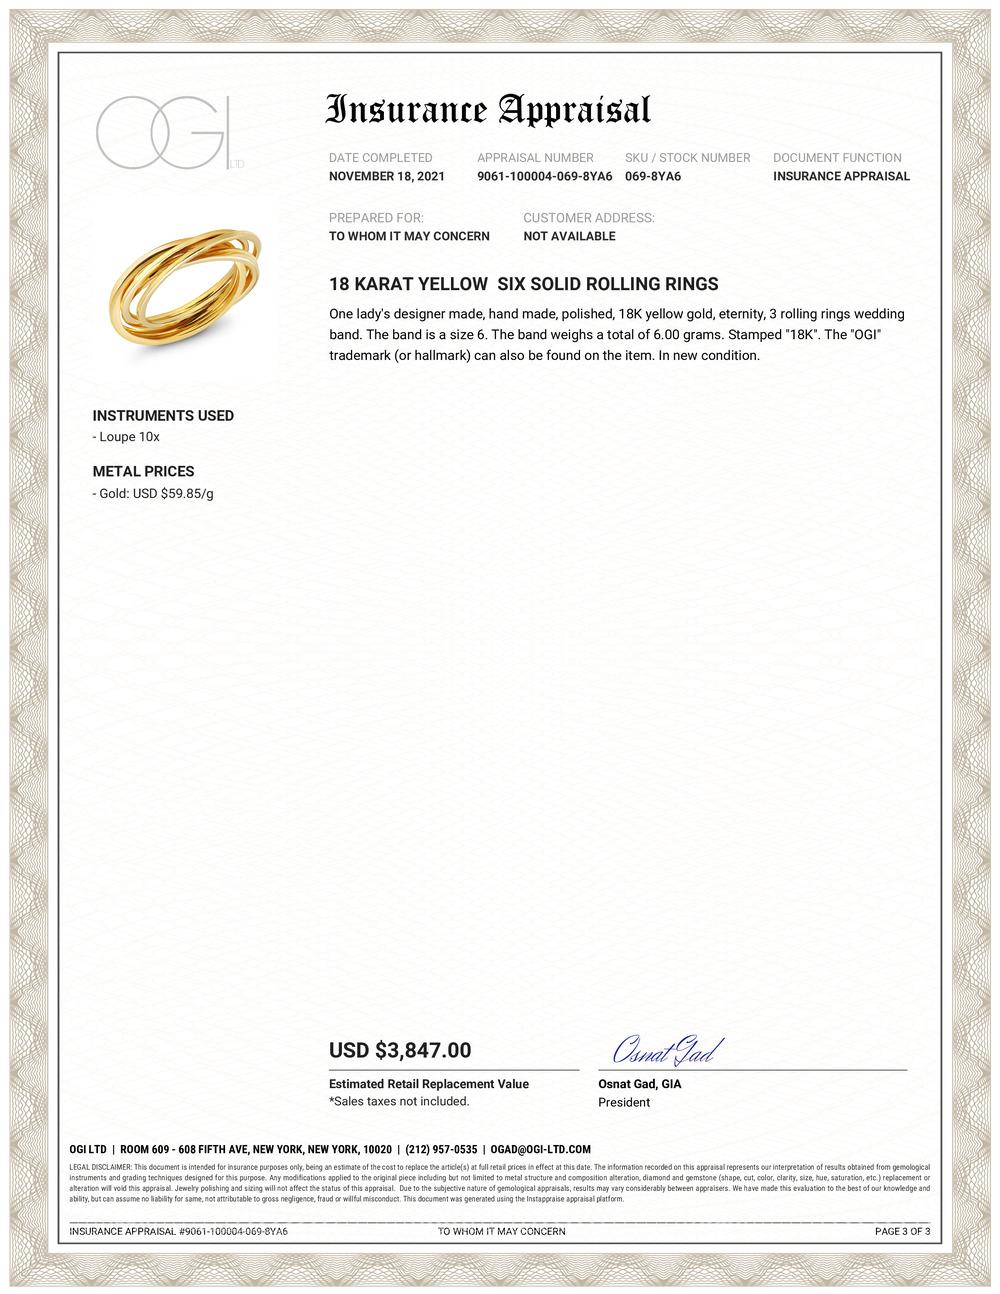 Introducing our exquisite piece of jewelry: the Eighteen Karat Yellow Gold Six Solid 6 Millimeter Rolling Ring in Size 6. This stunning ring is a true testament to elegance and craftsmanship, perfect for any occasion or as a meaningful gift for a